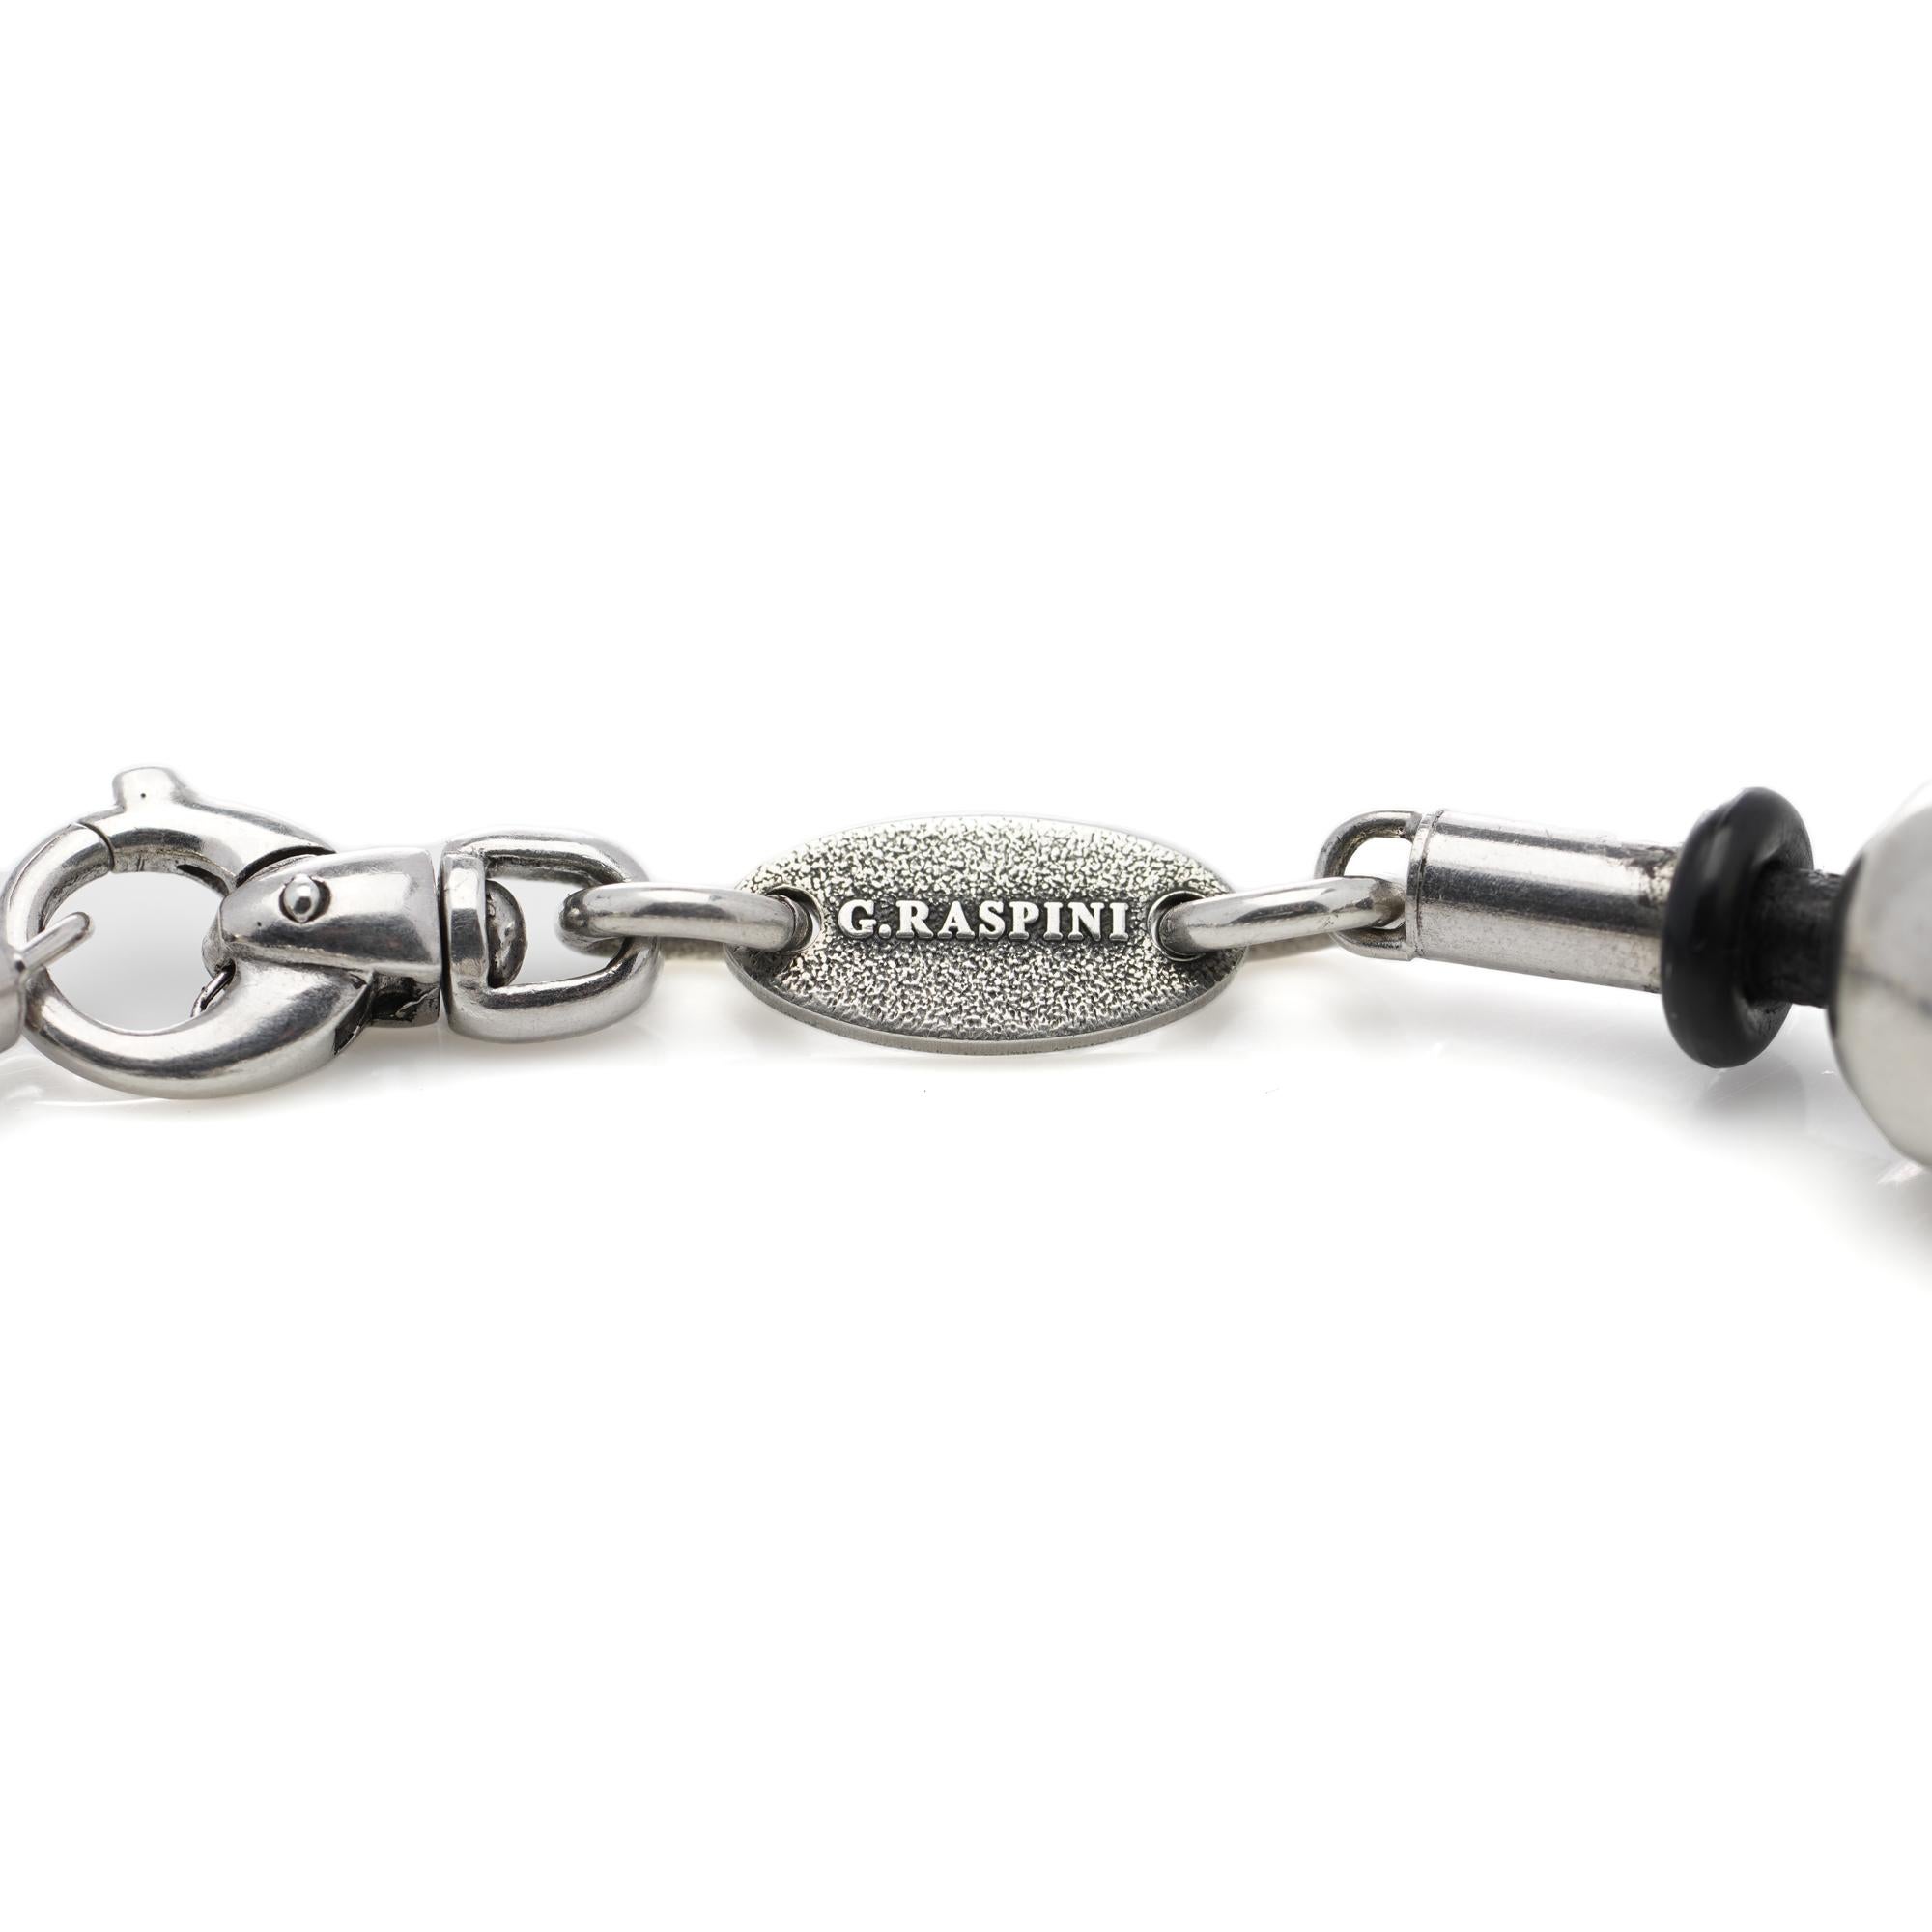 Giovani Raspini sterling 925 silver bead bracelet with skull accents For Sale 2